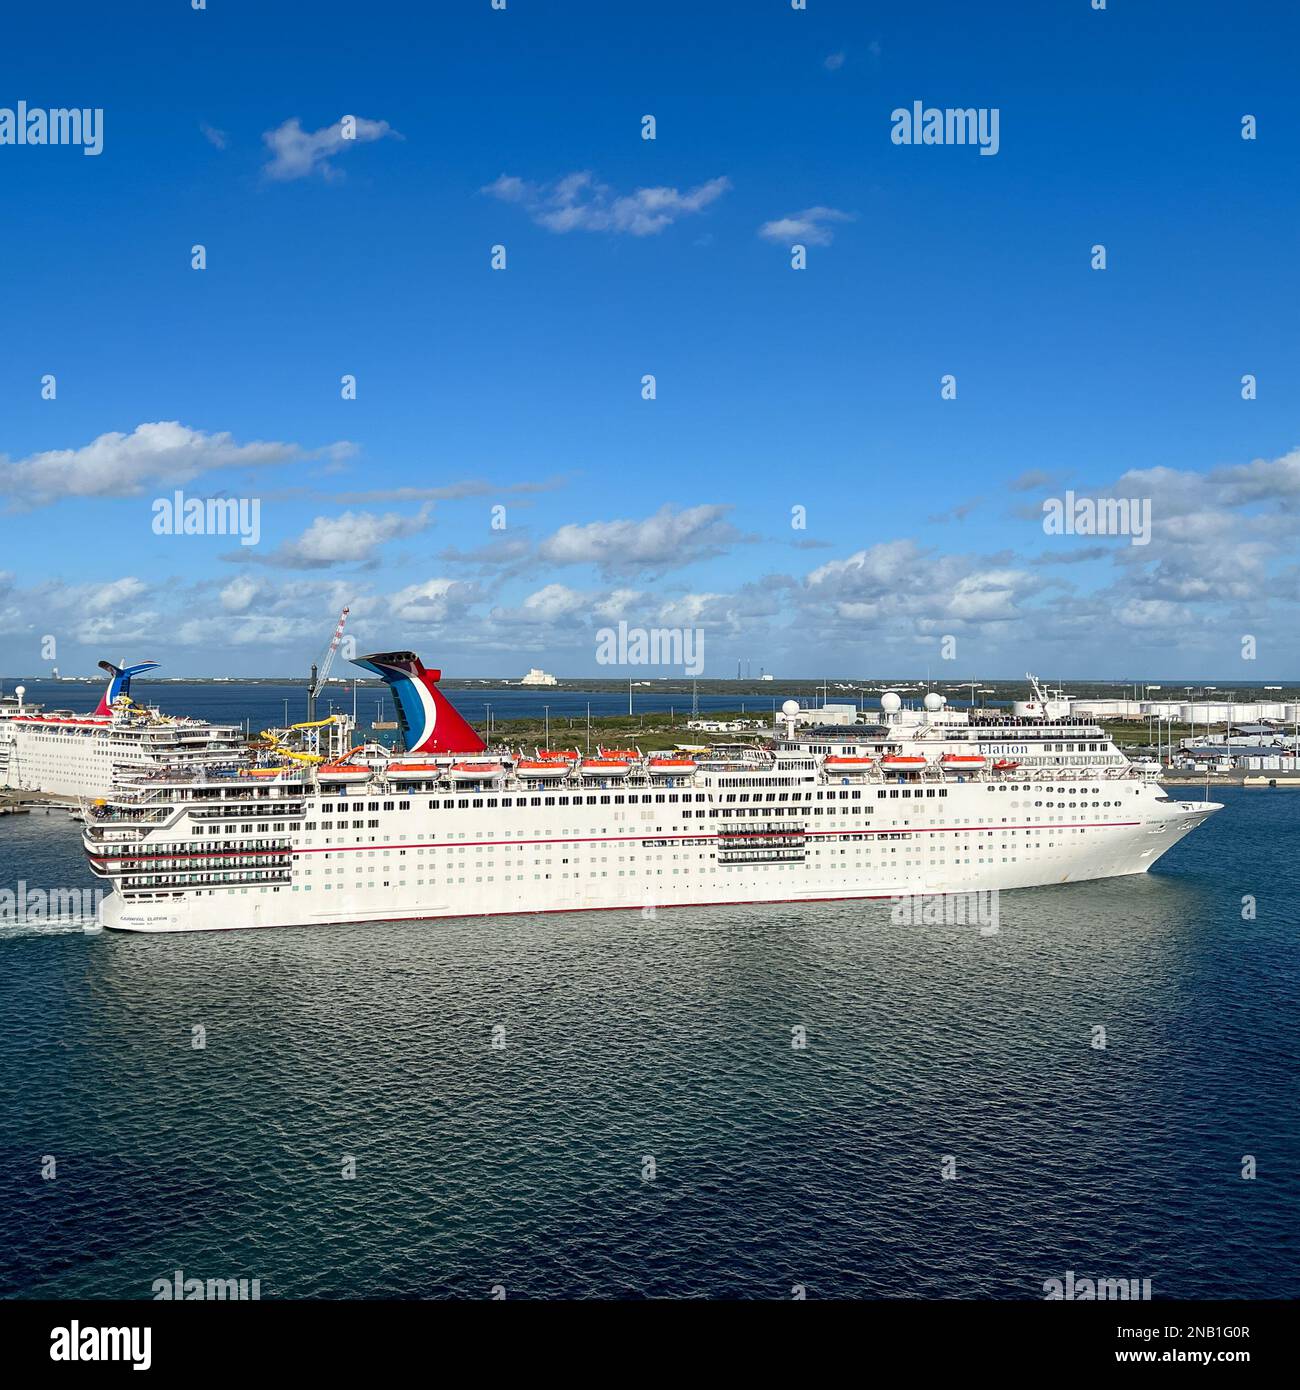 Cape Canaveral, FL USA - January 8, 2022: The Carnival cruise ship Elation sailing away from Port Canaveral, Florida. Stock Photo